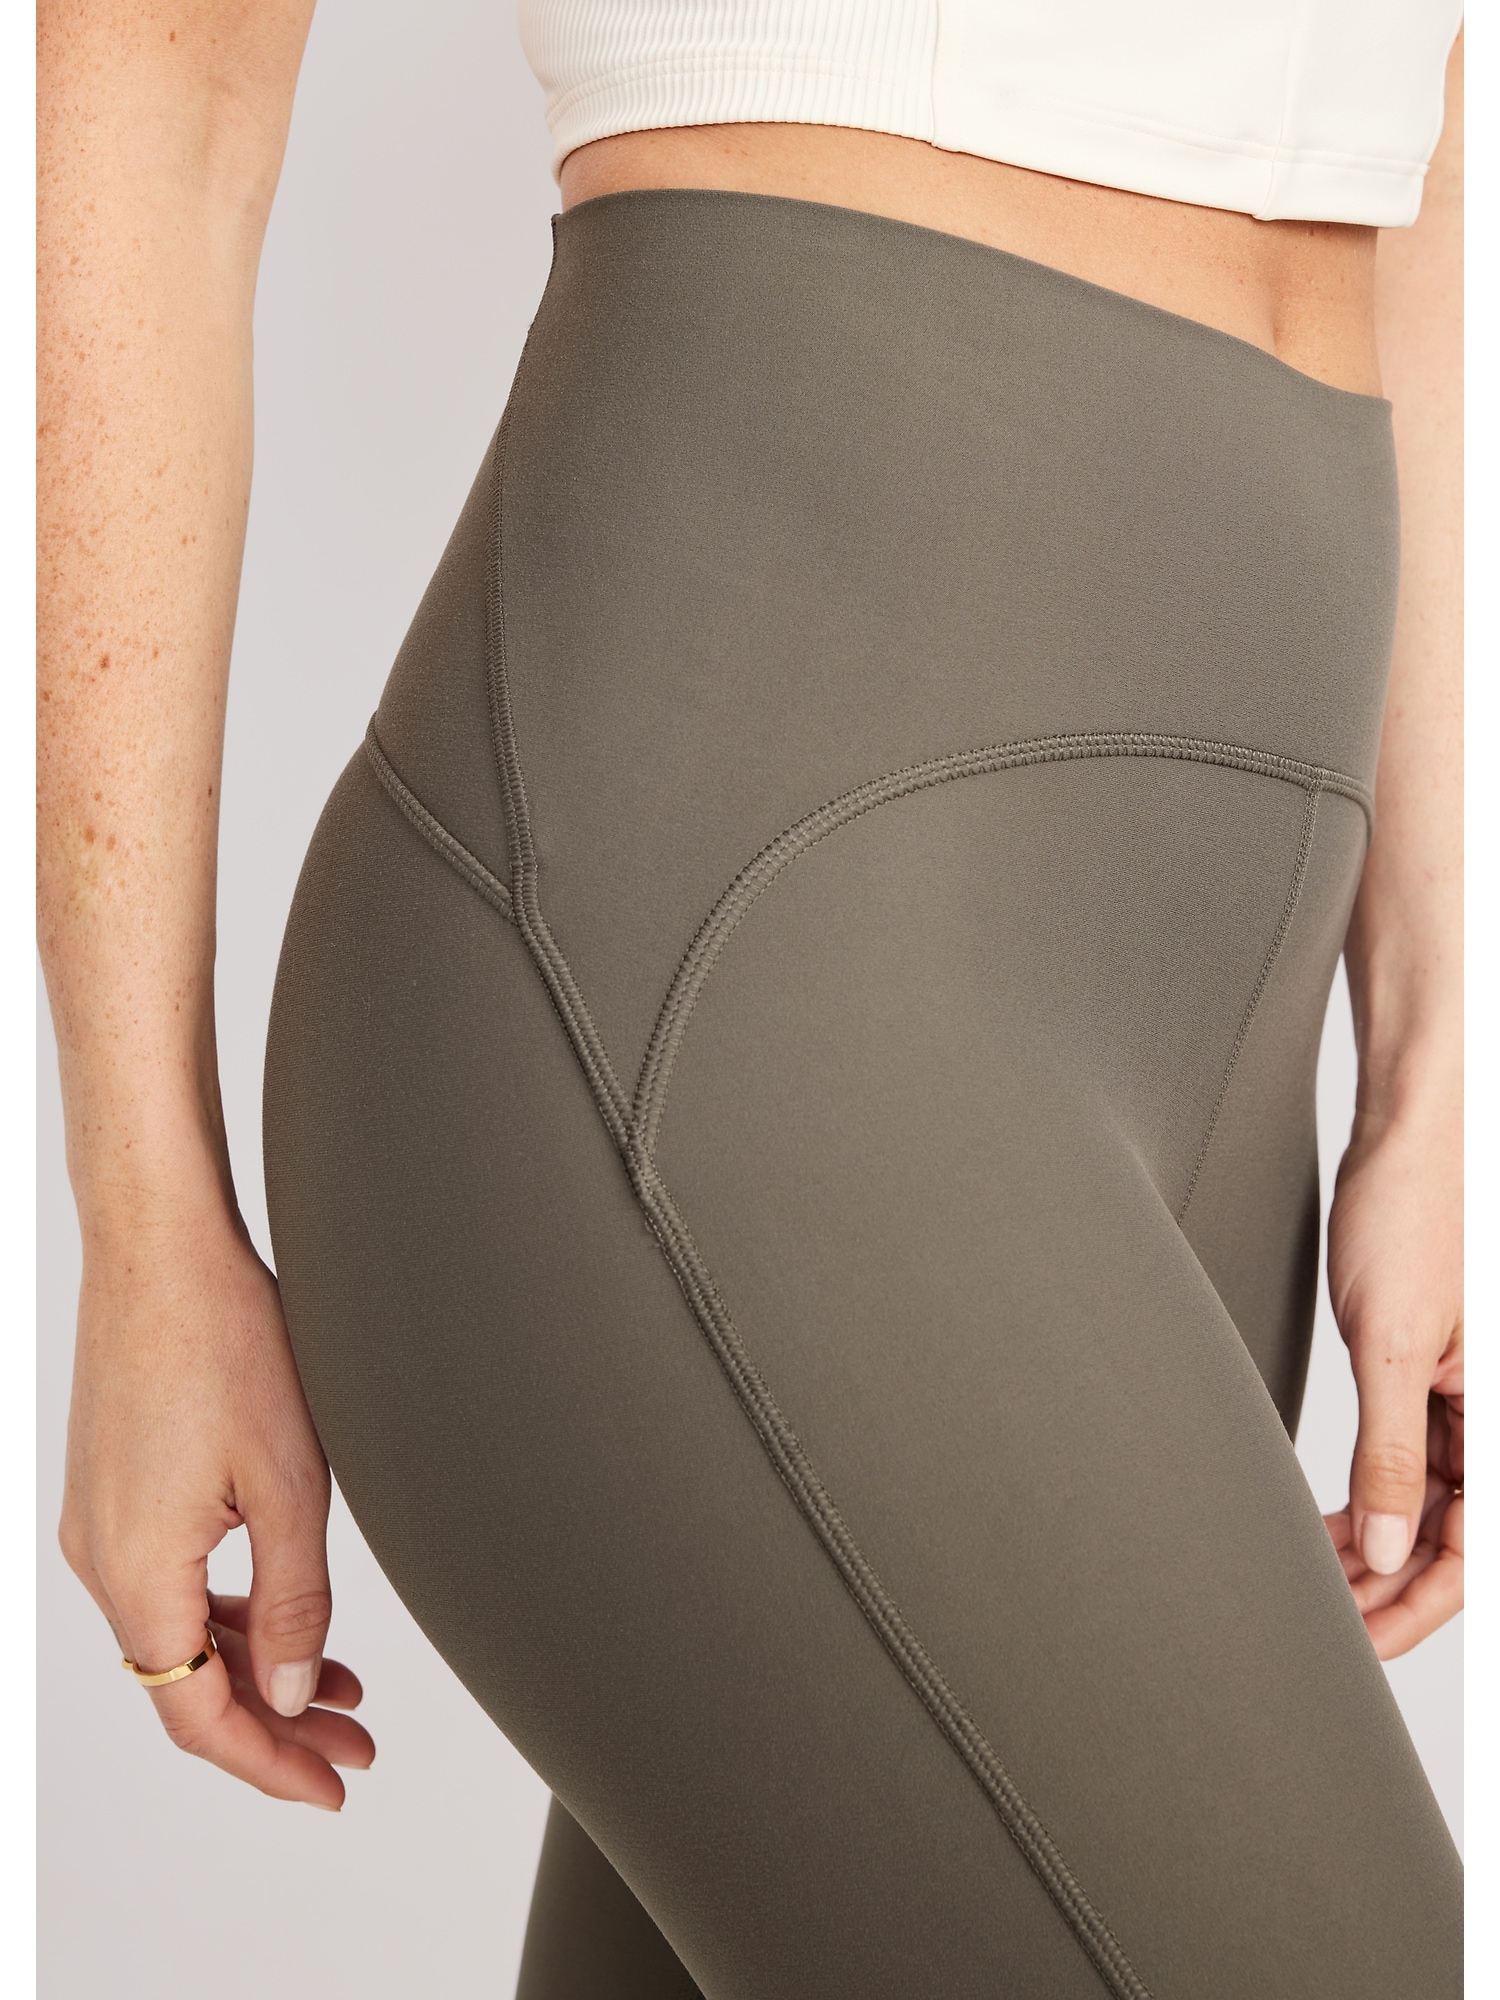 Old Navy High-Waisted Compression Leggings Review | SELF